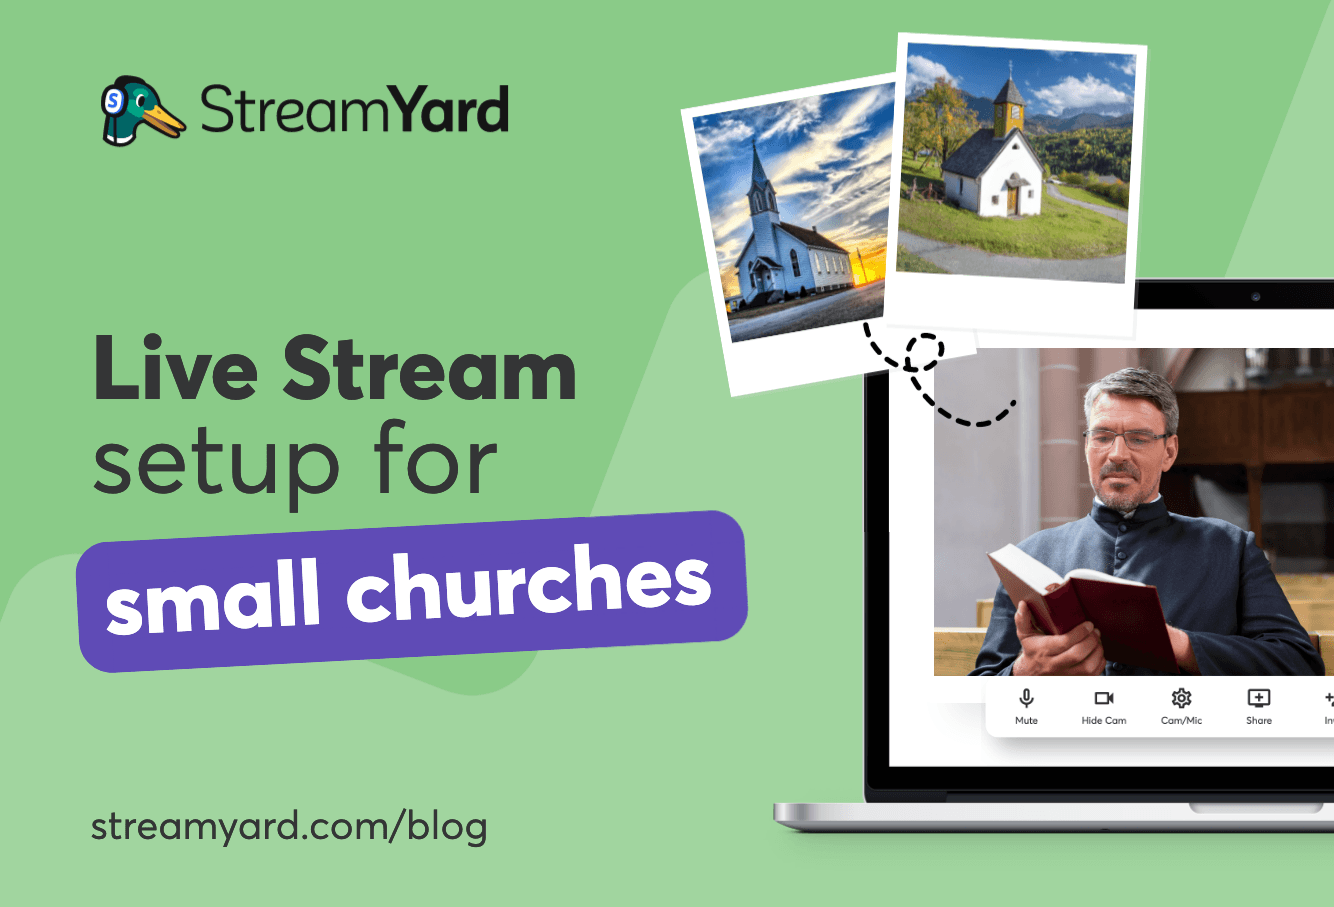 Find out what you need to have for the perfect small church live stream setup, along with the top recommendations from live streaming pros.